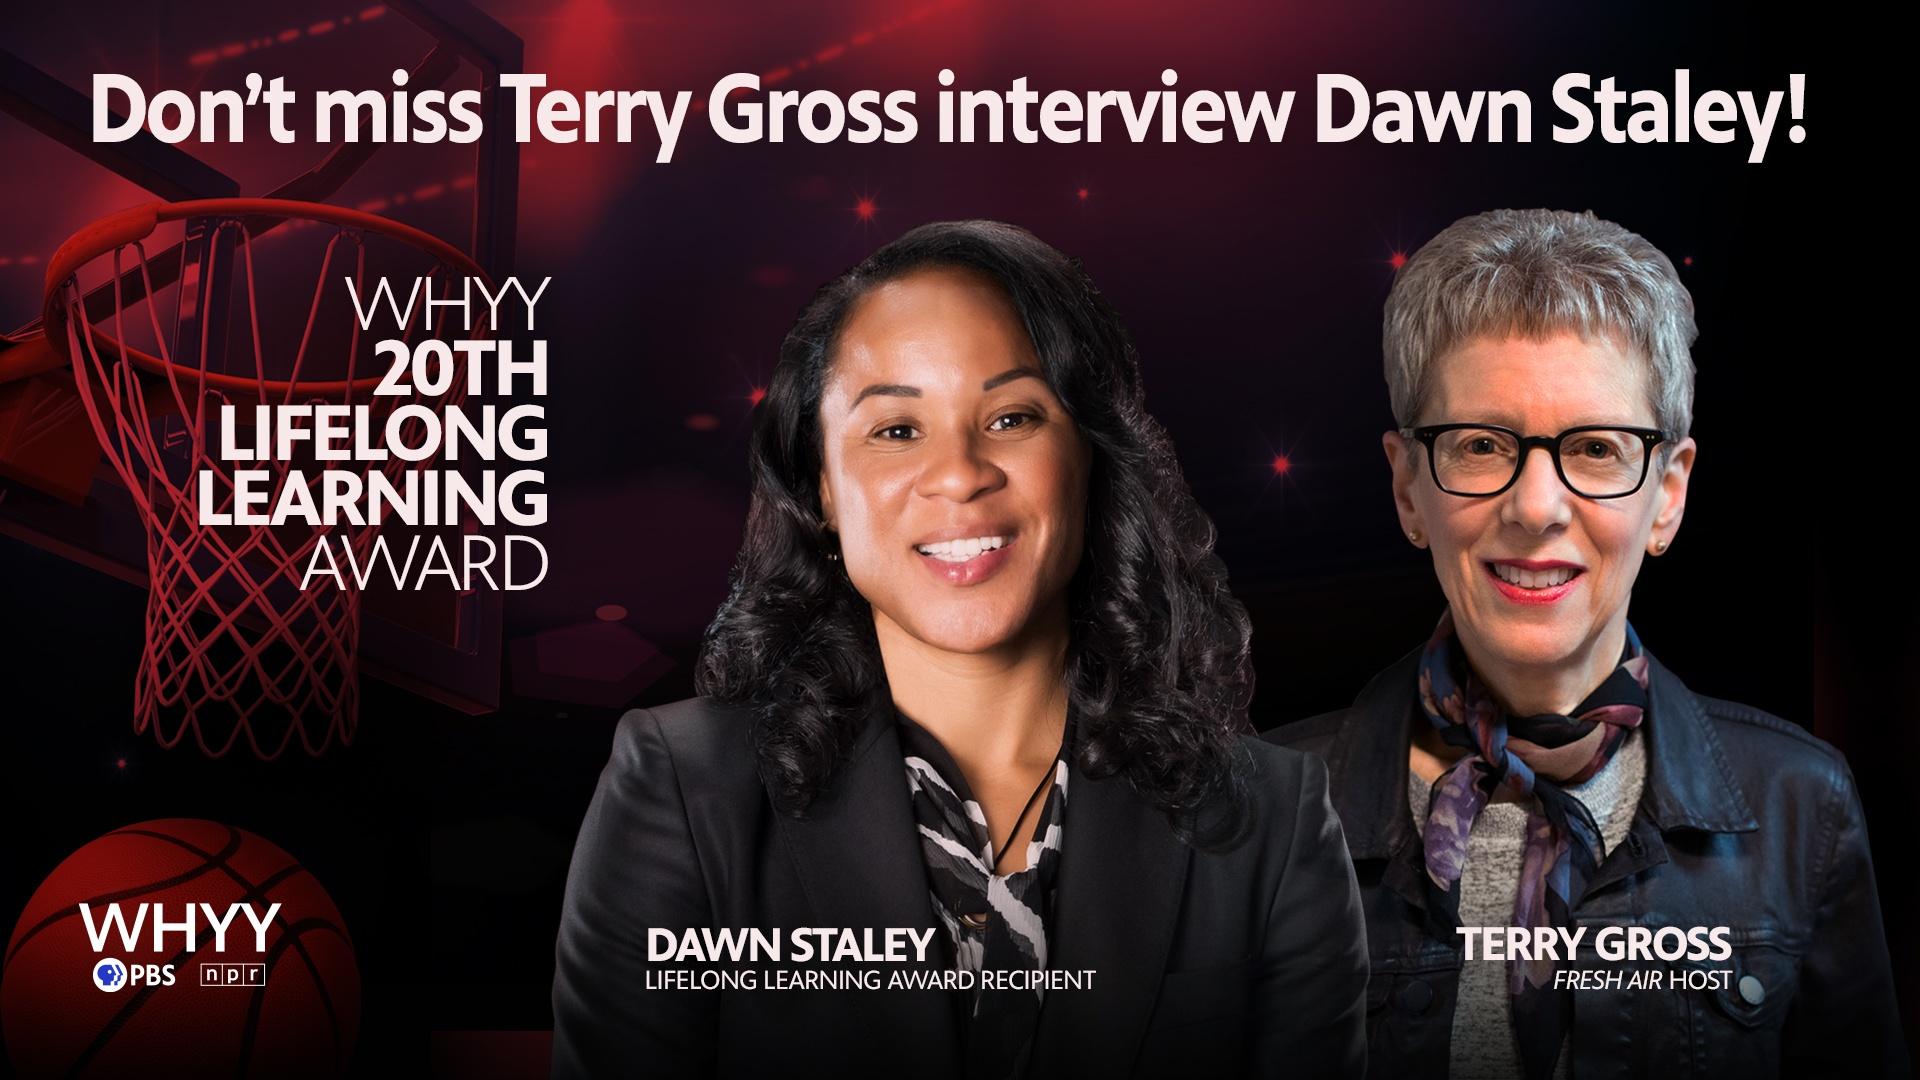 WHYY Presents, Terry Gross in Conversation with Dawn Staley